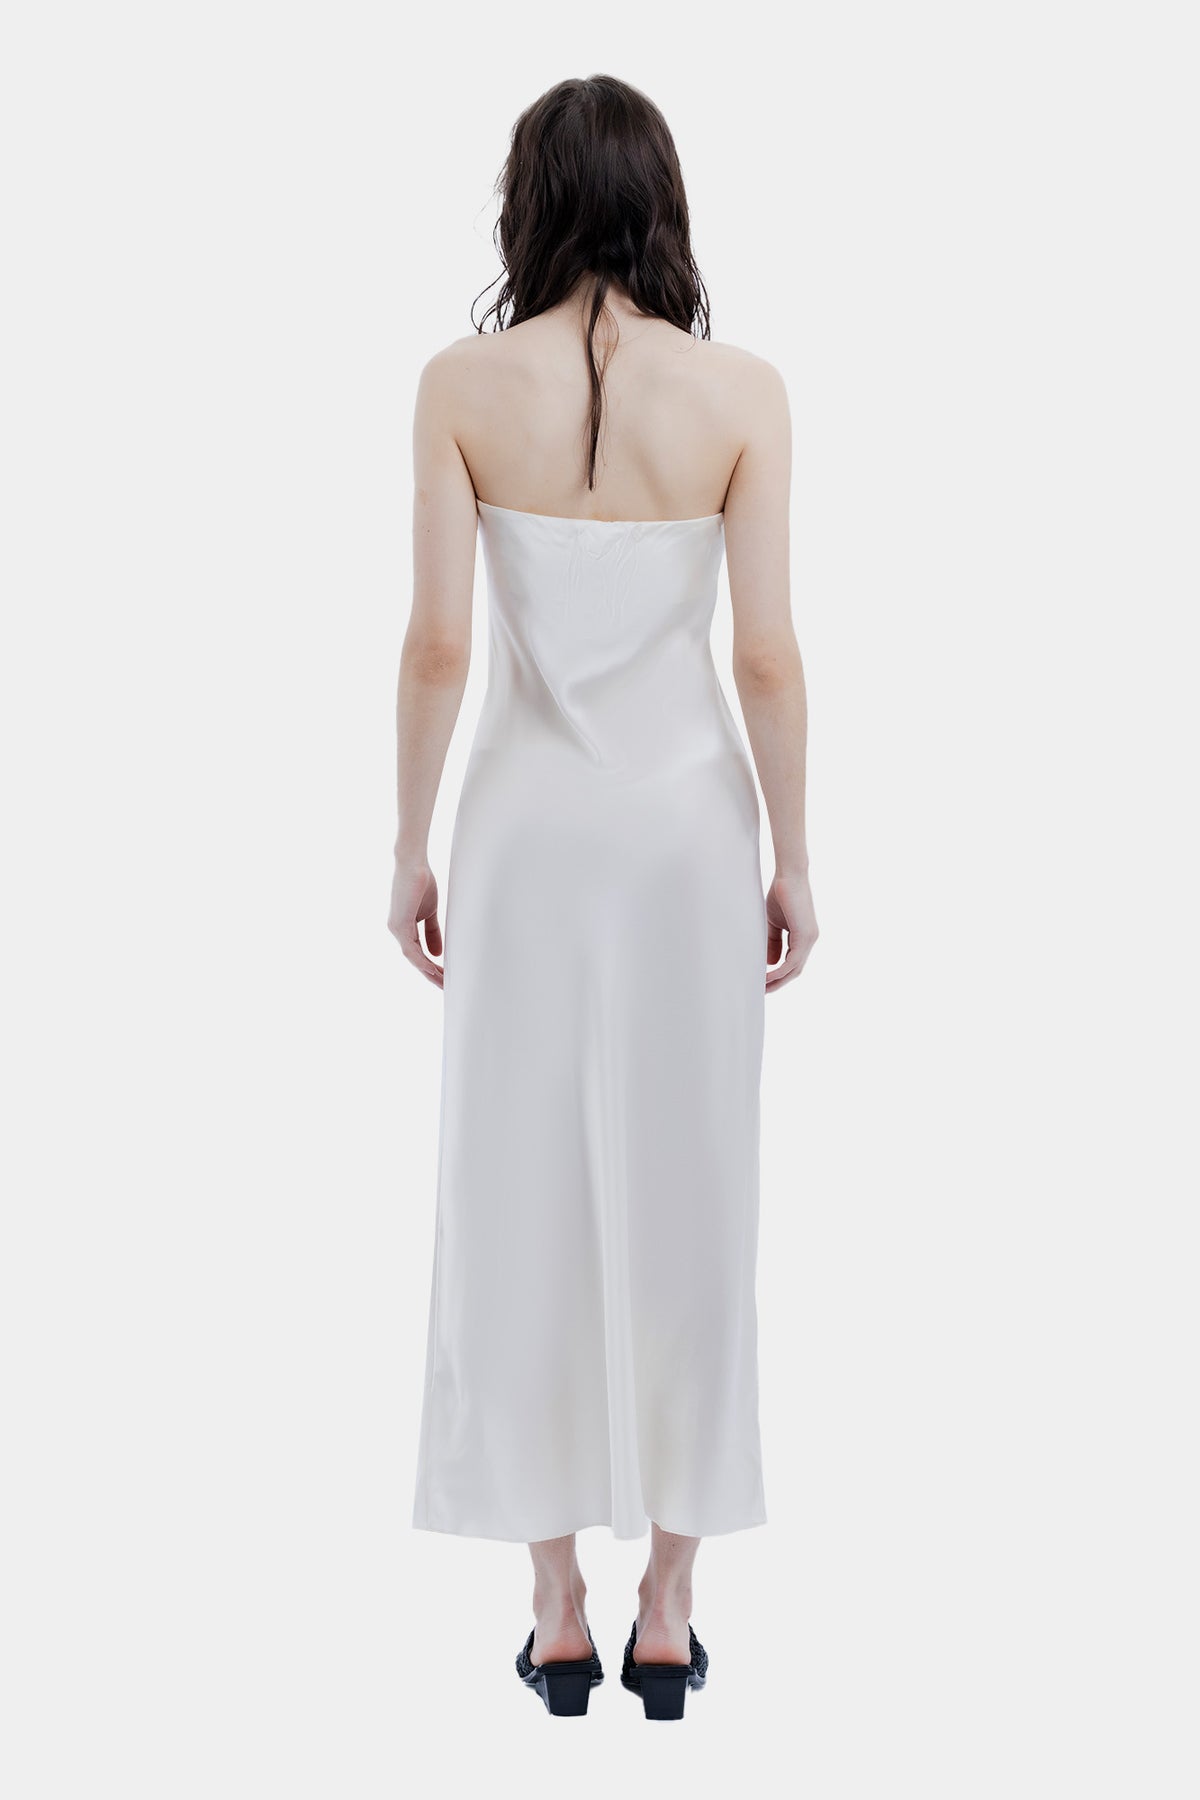 The Strapless Bias Midi Dress By GINIA In Buttercream